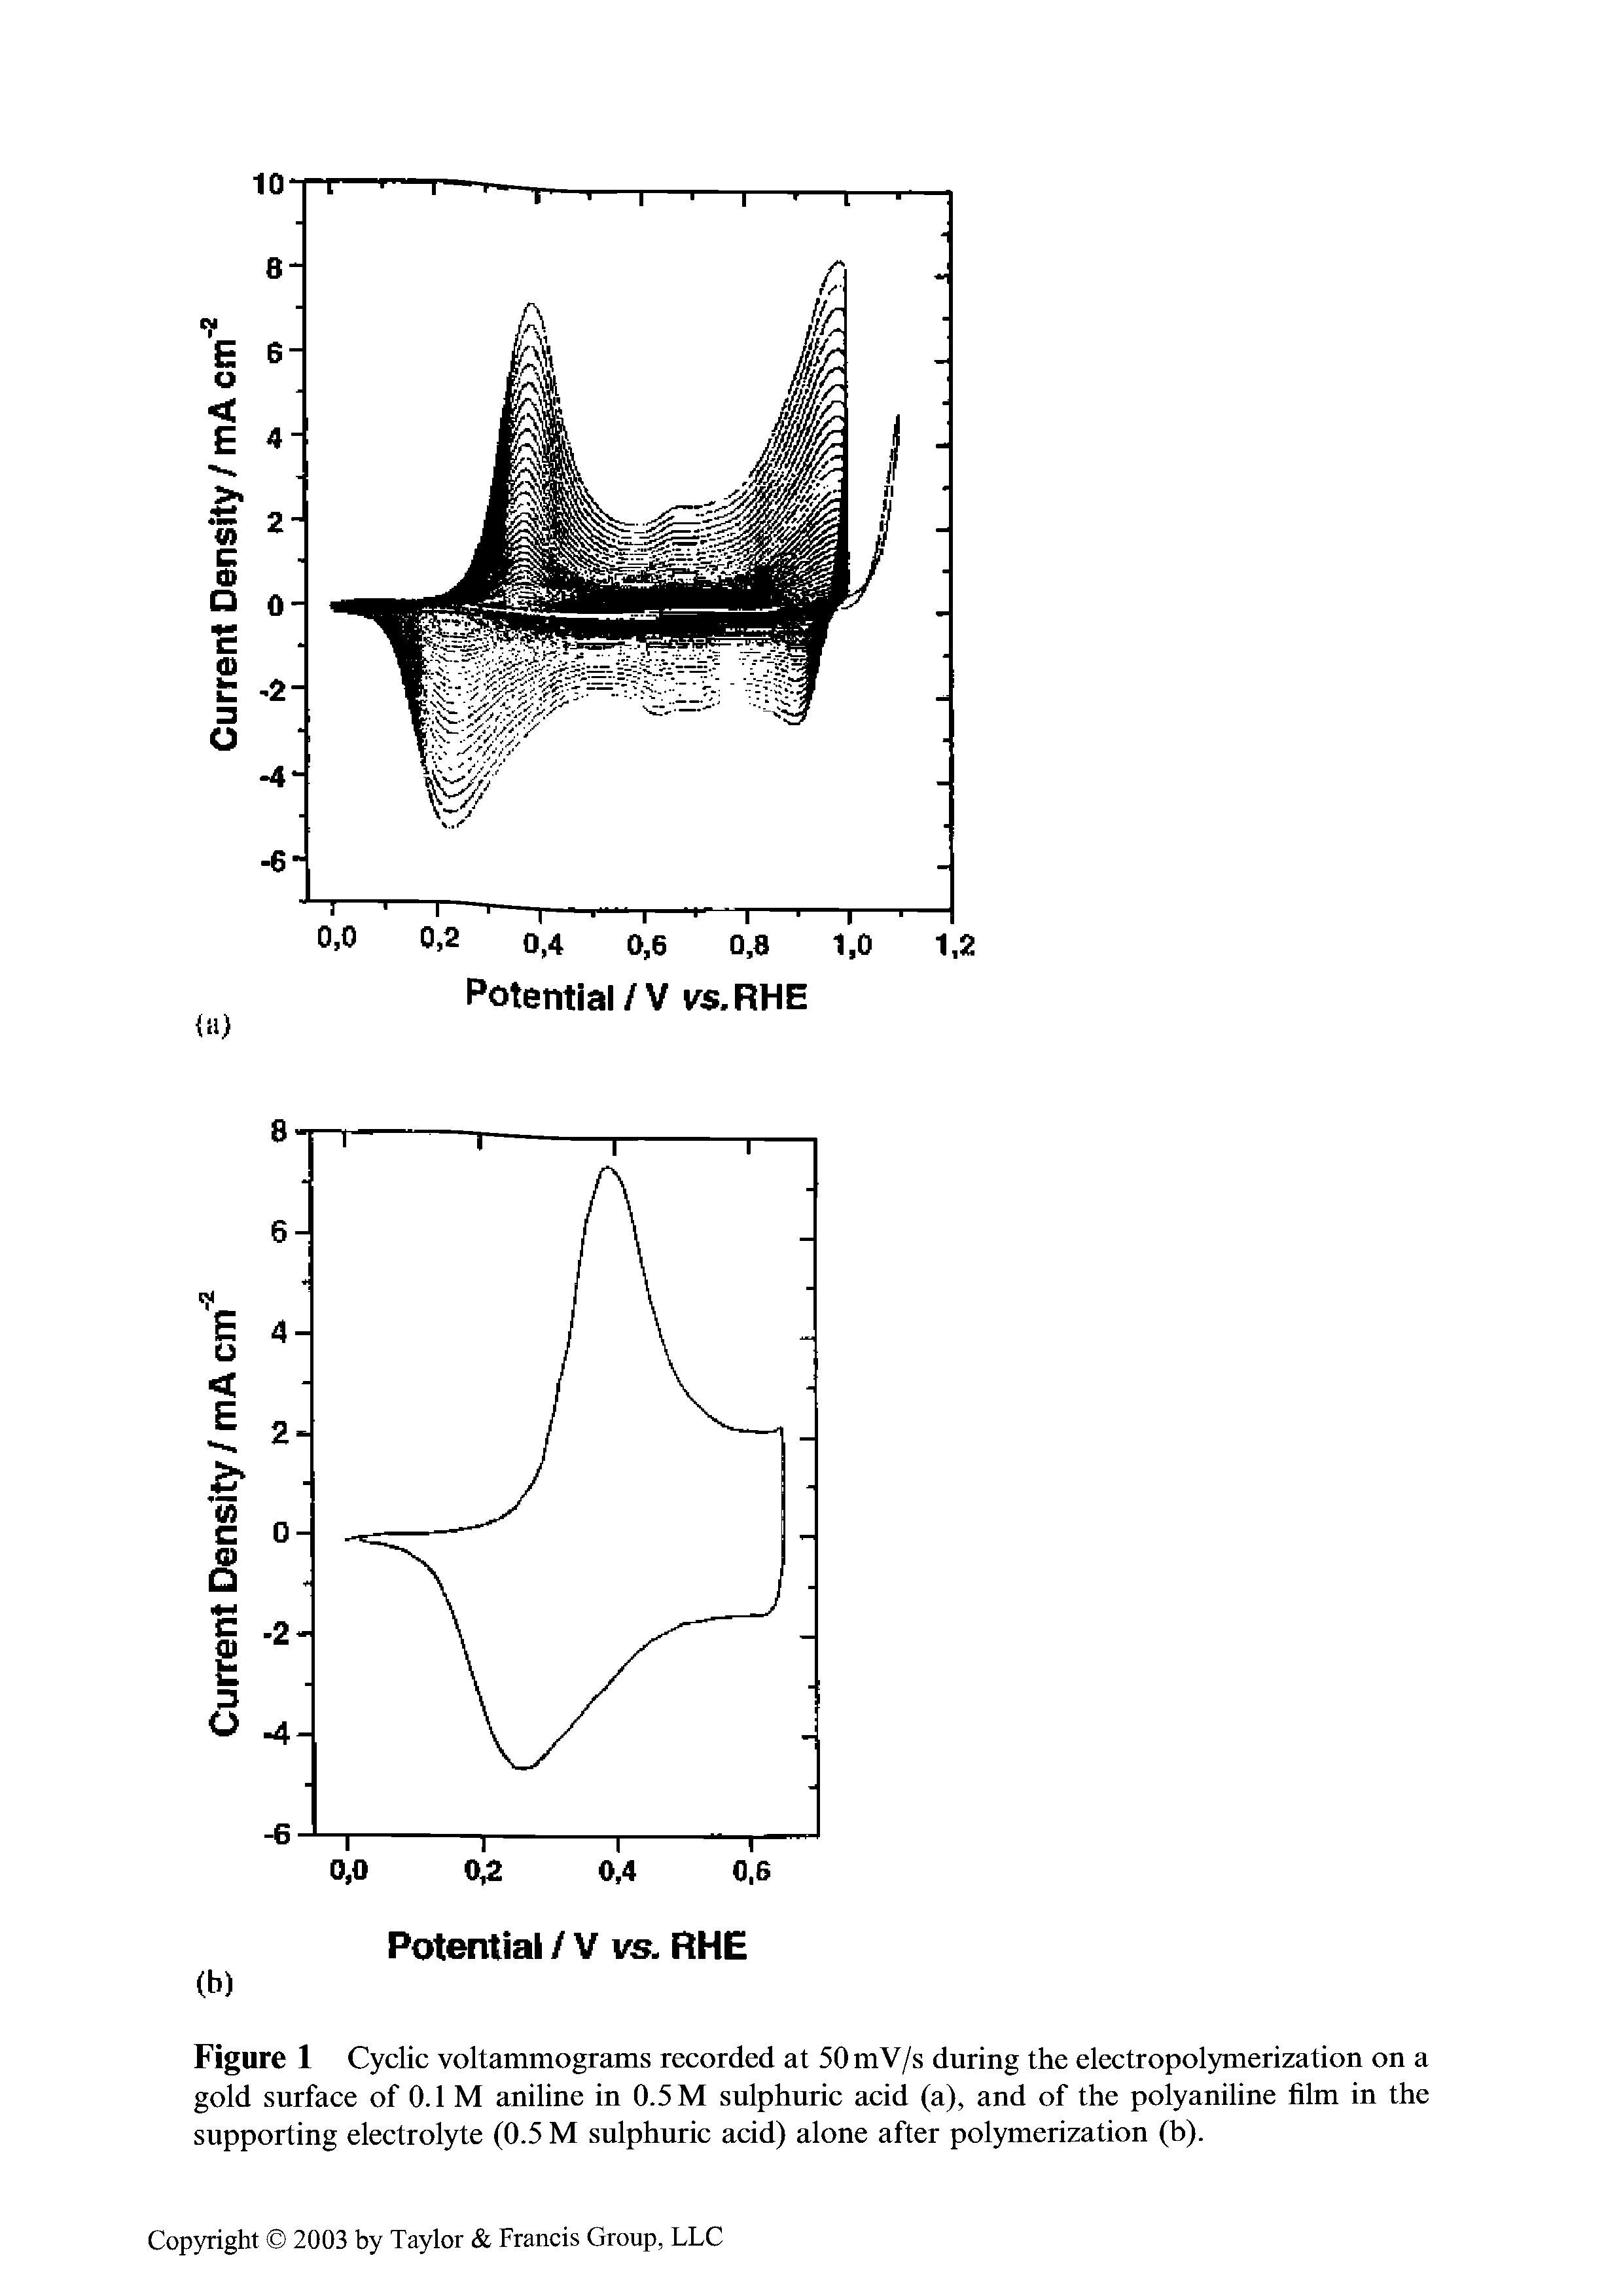 Figure 1 Cyclic voltammograms recorded at 50mV/s during the electropolymerization on a gold surface of 0.1 M aniline in 0.5 M sulphuric acid (a), and of the polyaniline film in the supporting electrolyte (0.5 M sulphuric acid) alone after polymerization (b).